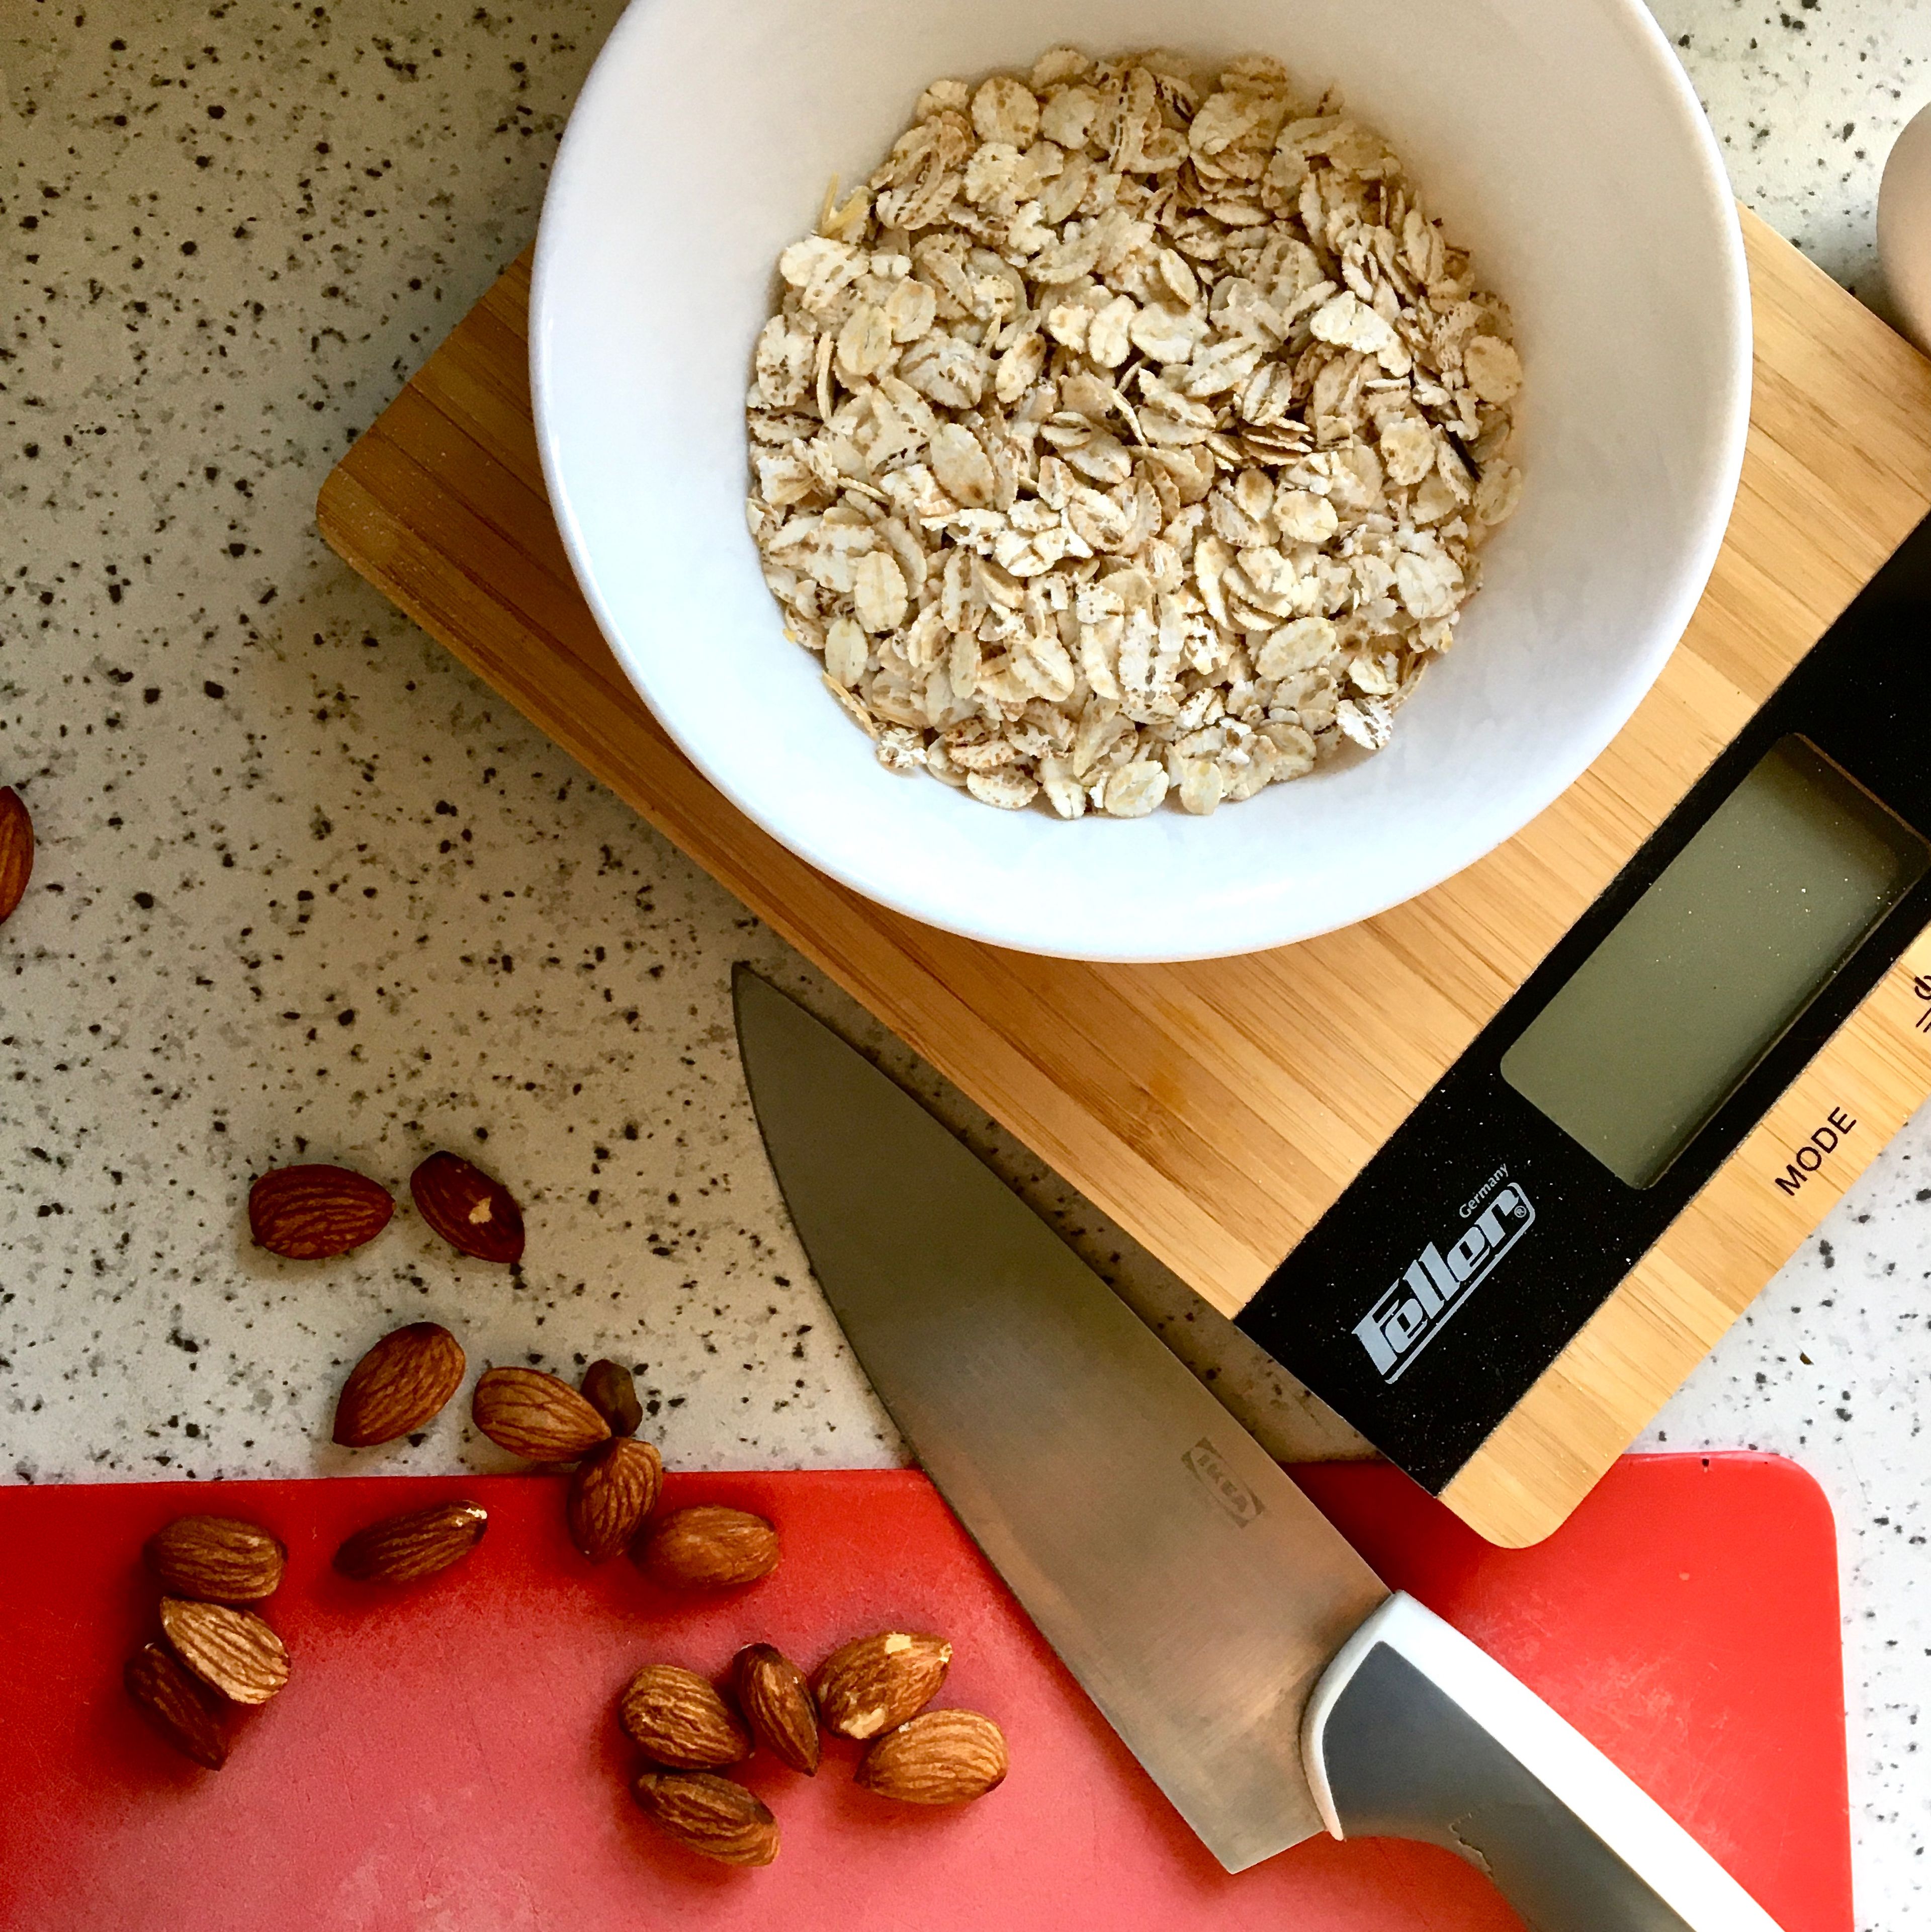 In a small bowl mix half of the chopped almonds with 2 tbsp of rolled oats. In another small bowl reserve 1-2 tbsp of sugar. Set both aside. In a medium bowl whisk the remaining oats and almonds with flour, wheat bran, salt and baking powder.